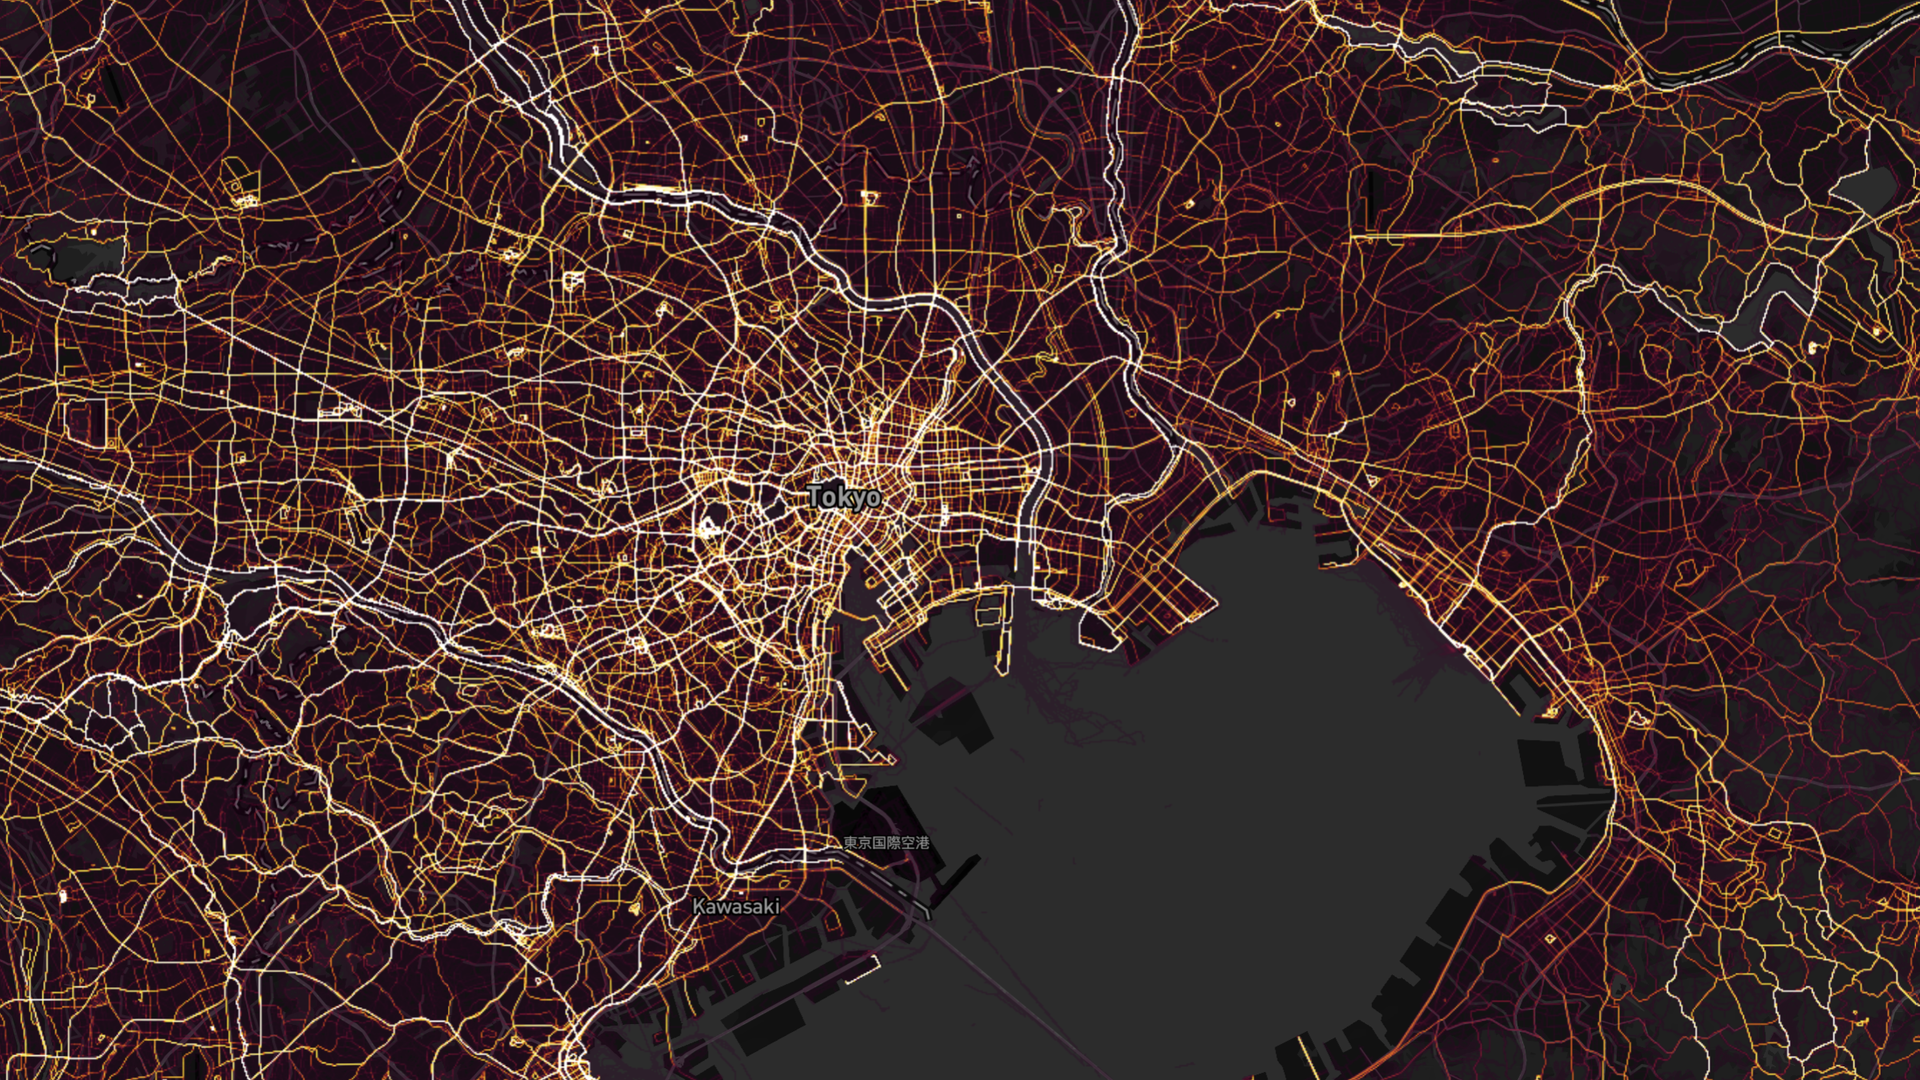 A heat map of popular exercise paths in Tokyo as measured by the Stava social network.